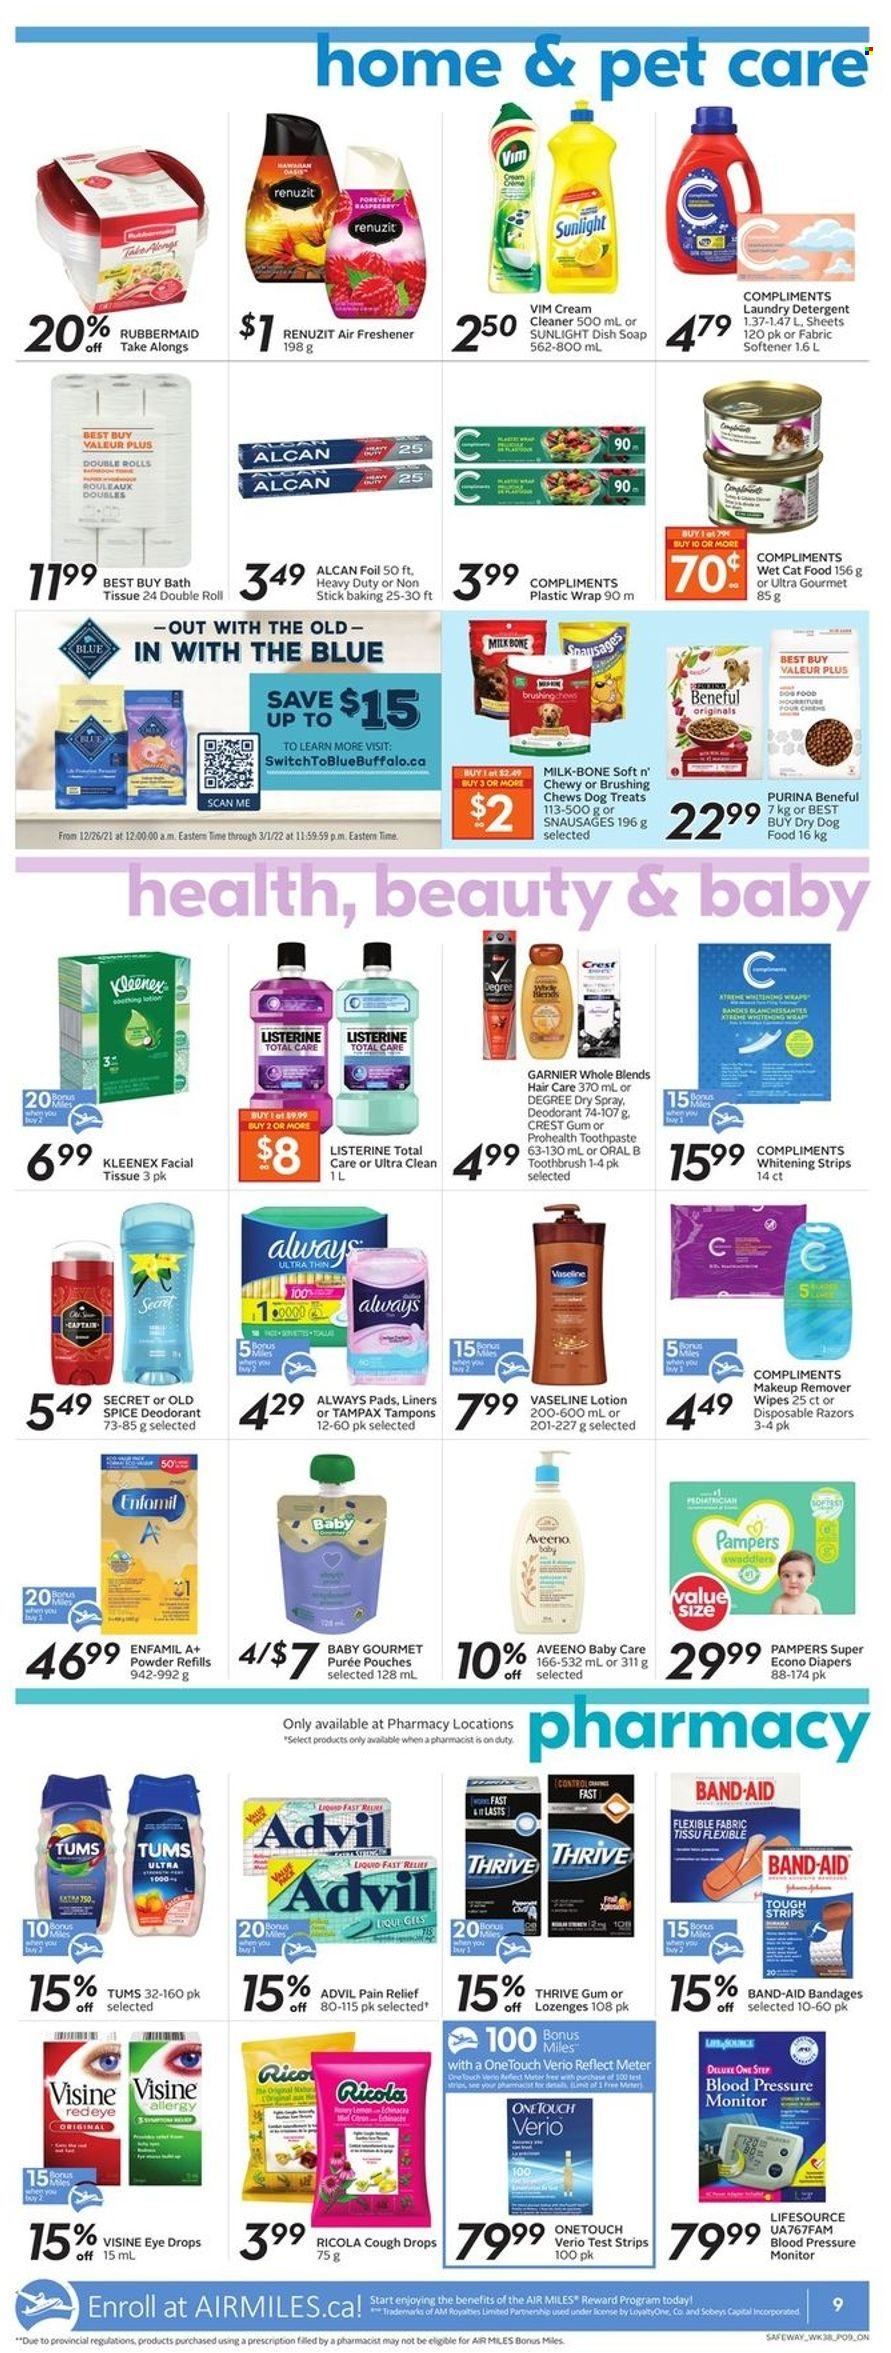 thumbnail - Safeway Flyer - January 13, 2022 - January 19, 2022 - Sales products - milk, Ricola, chewing gum, spice, Enfamil, baby food pouch, wipes, nappies, Aveeno, bath tissue, Kleenex, cream cleaner, cleaner, fabric softener, laundry detergent, Sunlight, Vaseline, soap, toothbrush, toothpaste, Crest, Always pads, tampons, body lotion, anti-perspirant, disposable razor, makeup remover, animal food, cat food, dog food, Purina, dry dog food, wet cat food, pain relief, eye drops, Advil Rapid, cough drops, pressure monitor, band-aid, detergent, Garnier, Listerine, Tampax, Pampers, Old Spice, Oral-B, deodorant. Page 10.